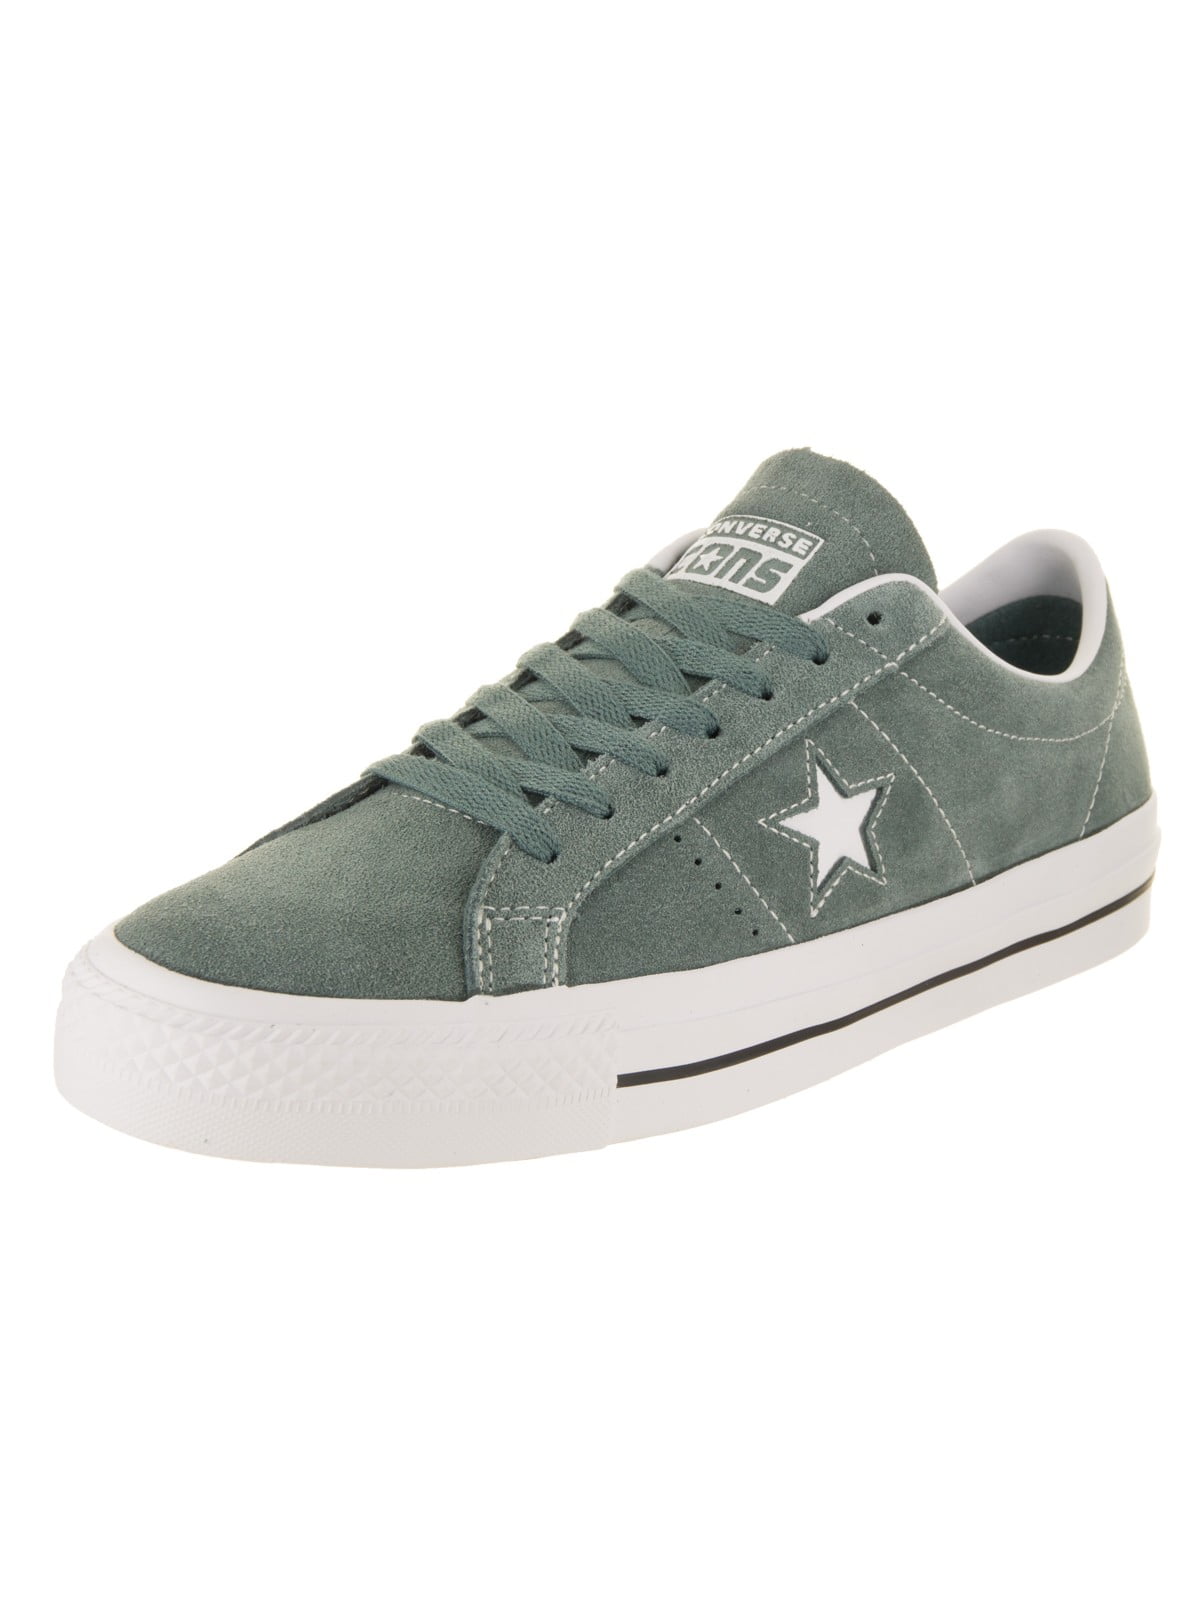 converse one star pro ox skate shoes